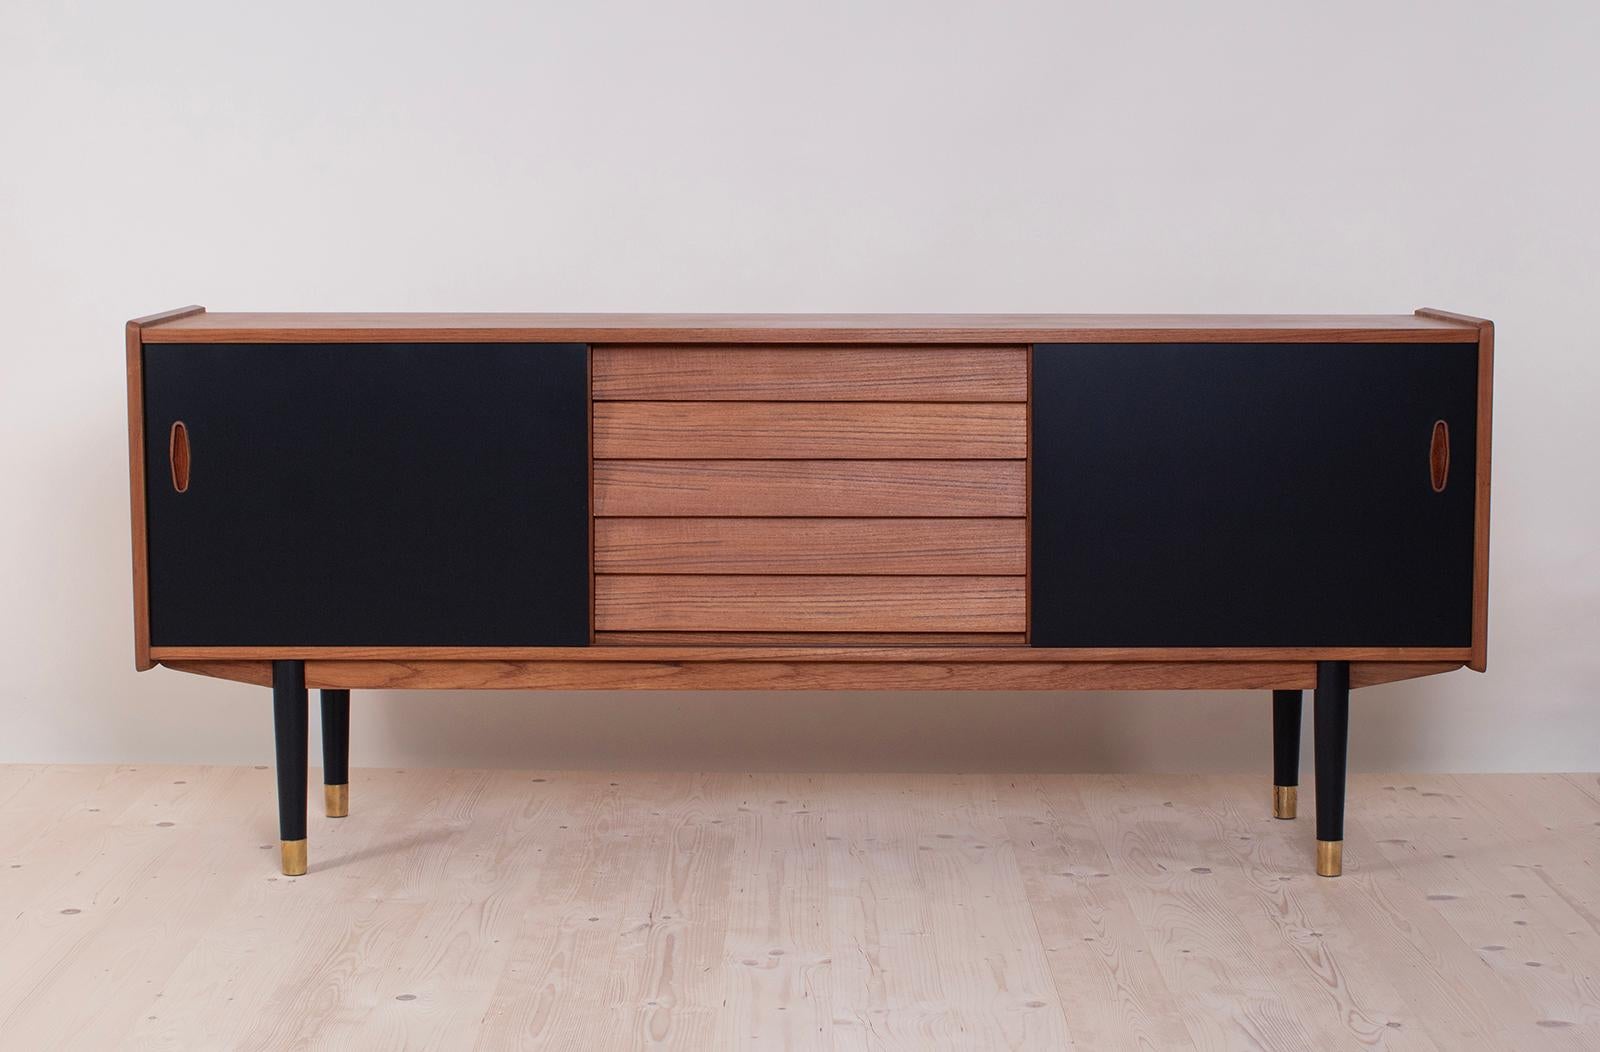 This is not so common model of sideboard by Nils Jonsson in teakwood with black sliding door, two sculpted handles, elegant base completed with subtle slender legs, all 4 legs are finished with brass – a great example of Scandinavian Modern style in